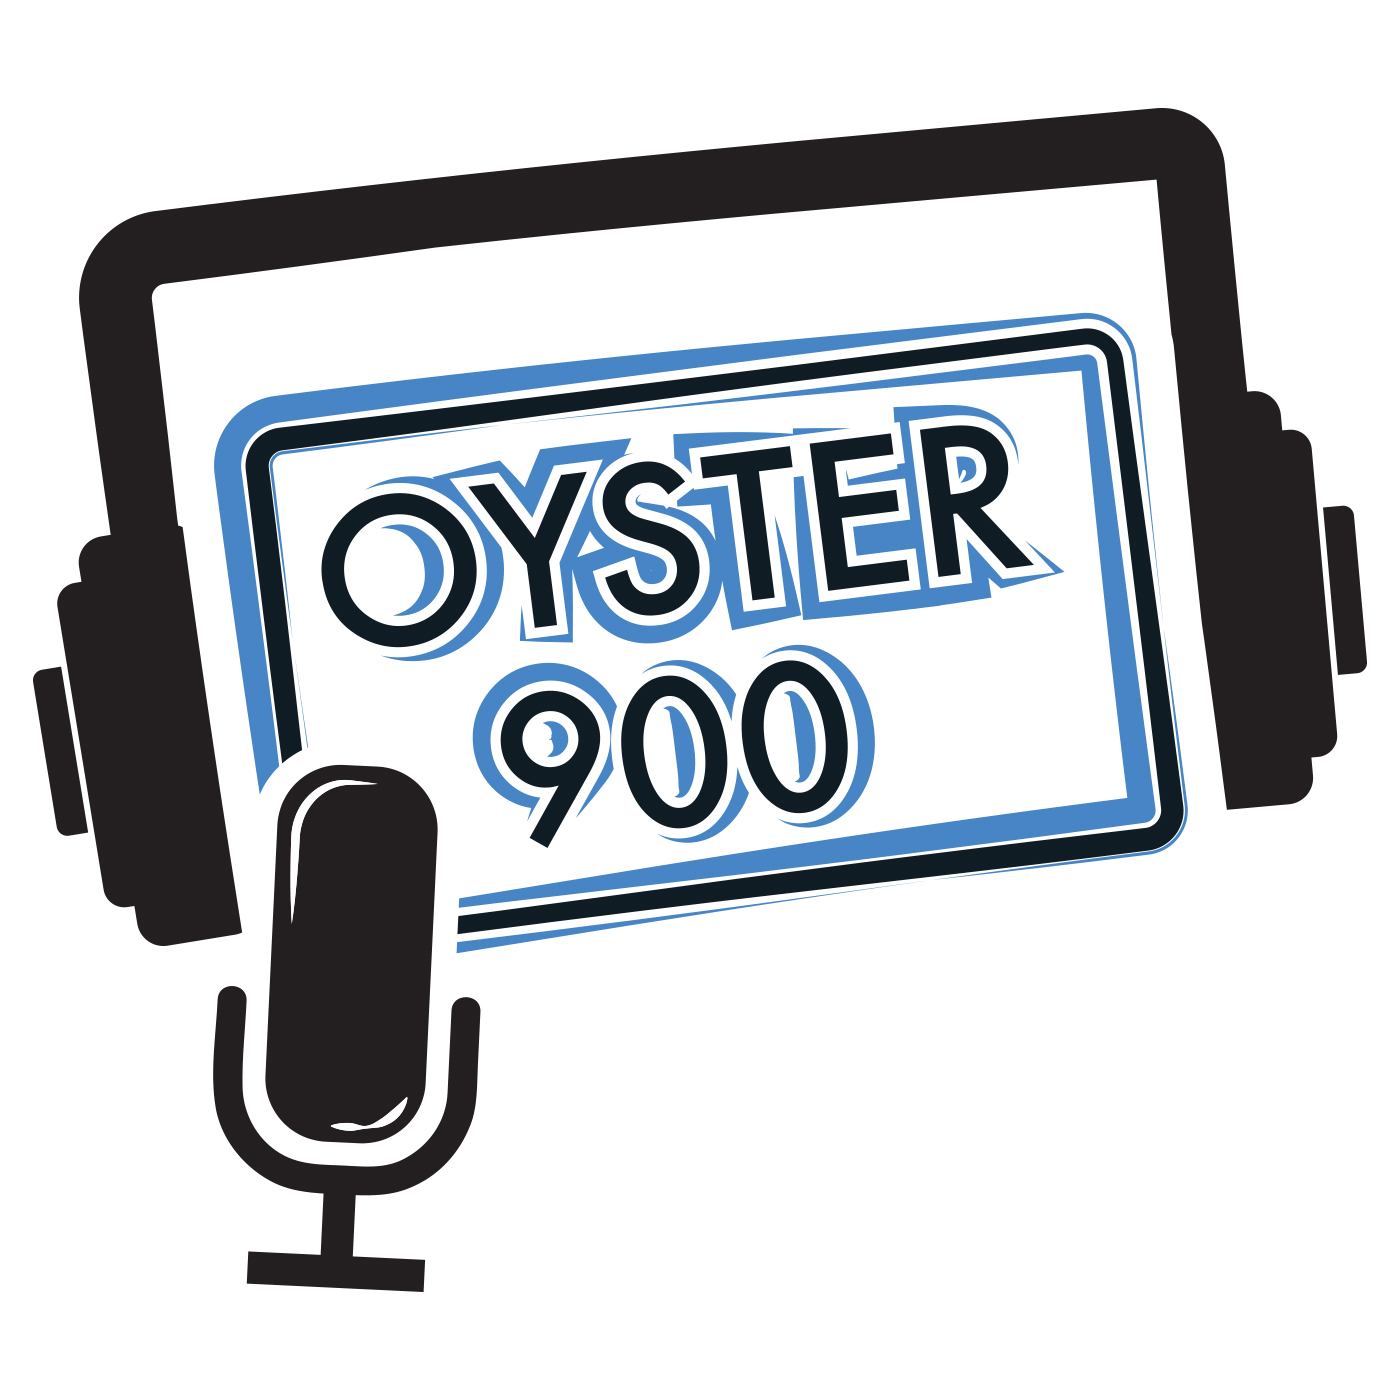 Oyster900